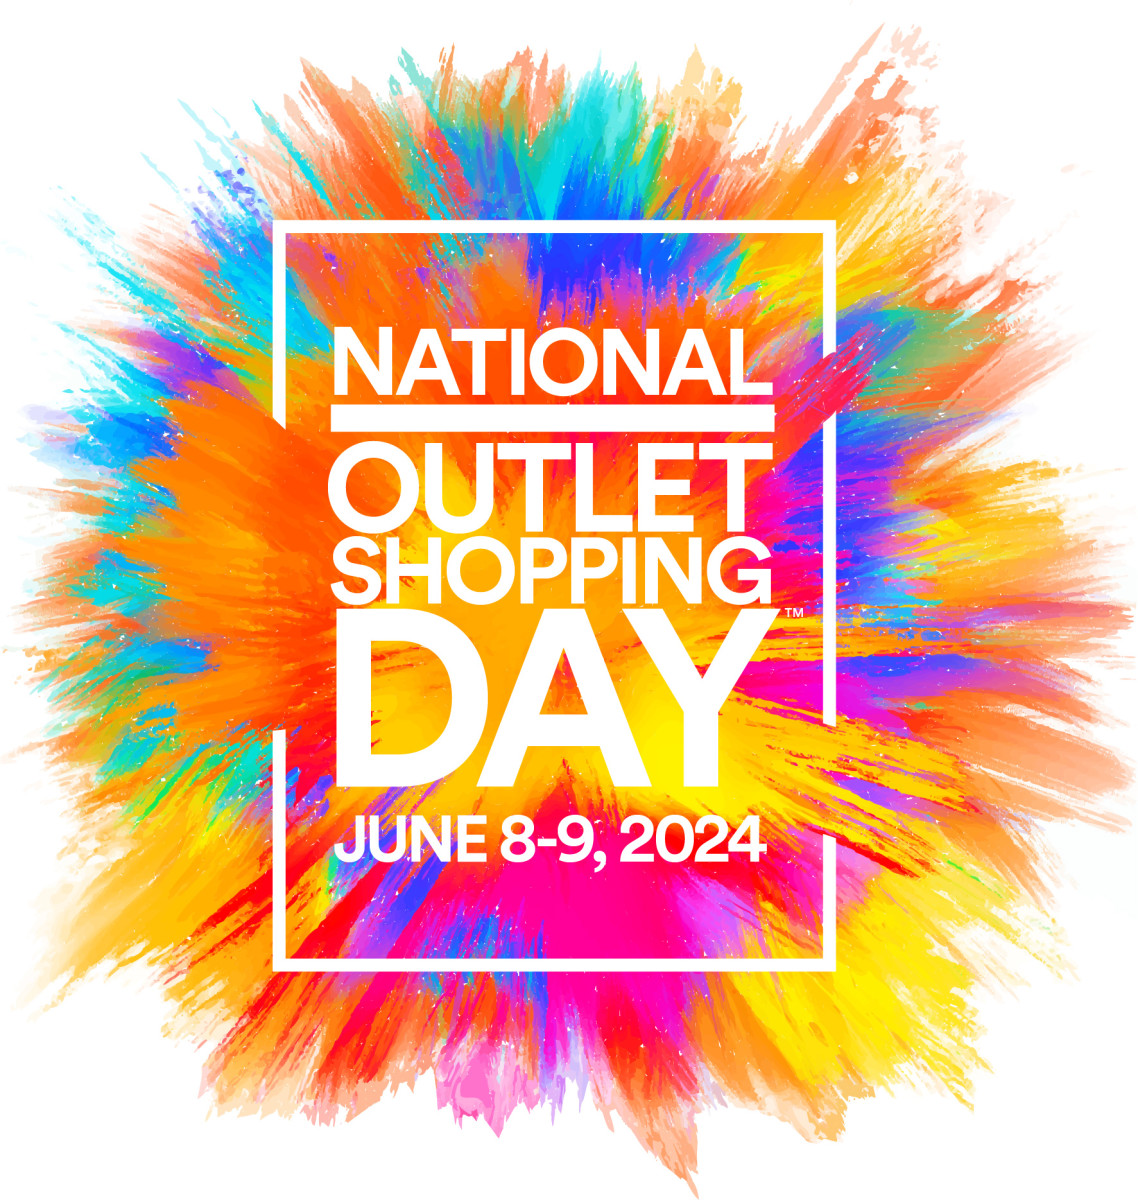 NATIONAL OUTLET SHOPPING DAY June 8 National Day Calendar